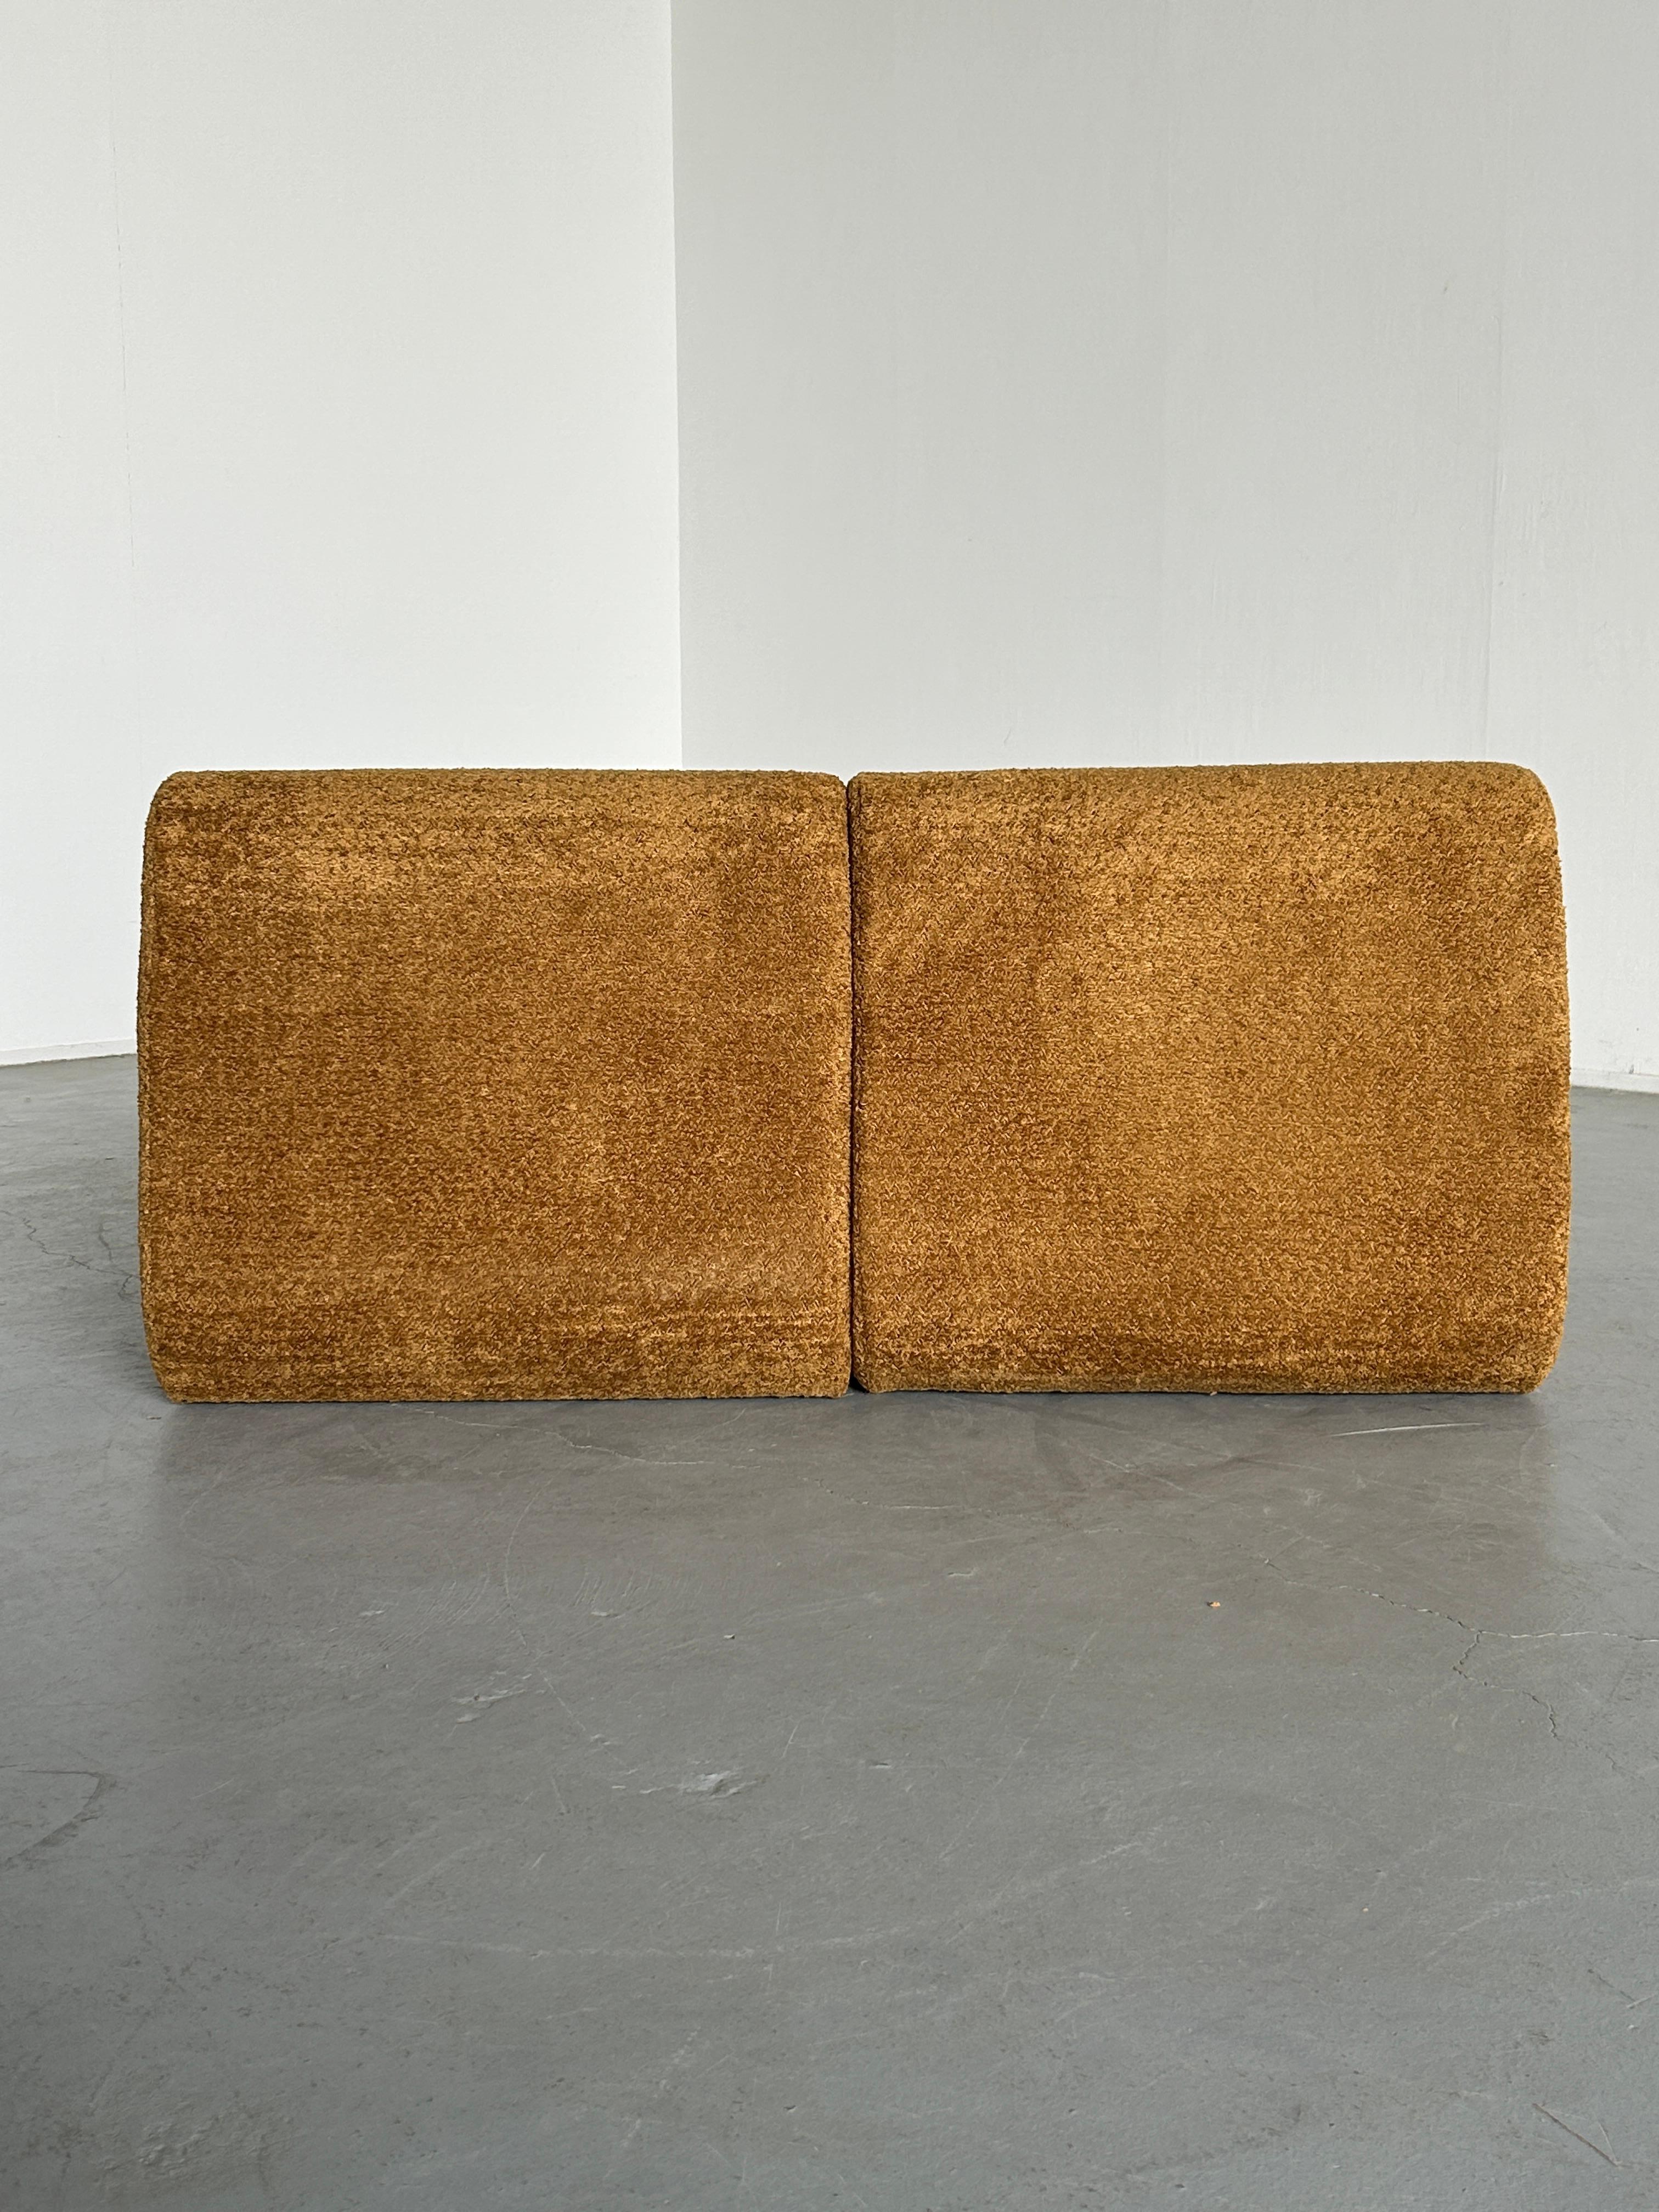 Pair of Italian Mid-Century-Modern Lounge Chairs in Ochre Boucle, 1970s Italy For Sale 1